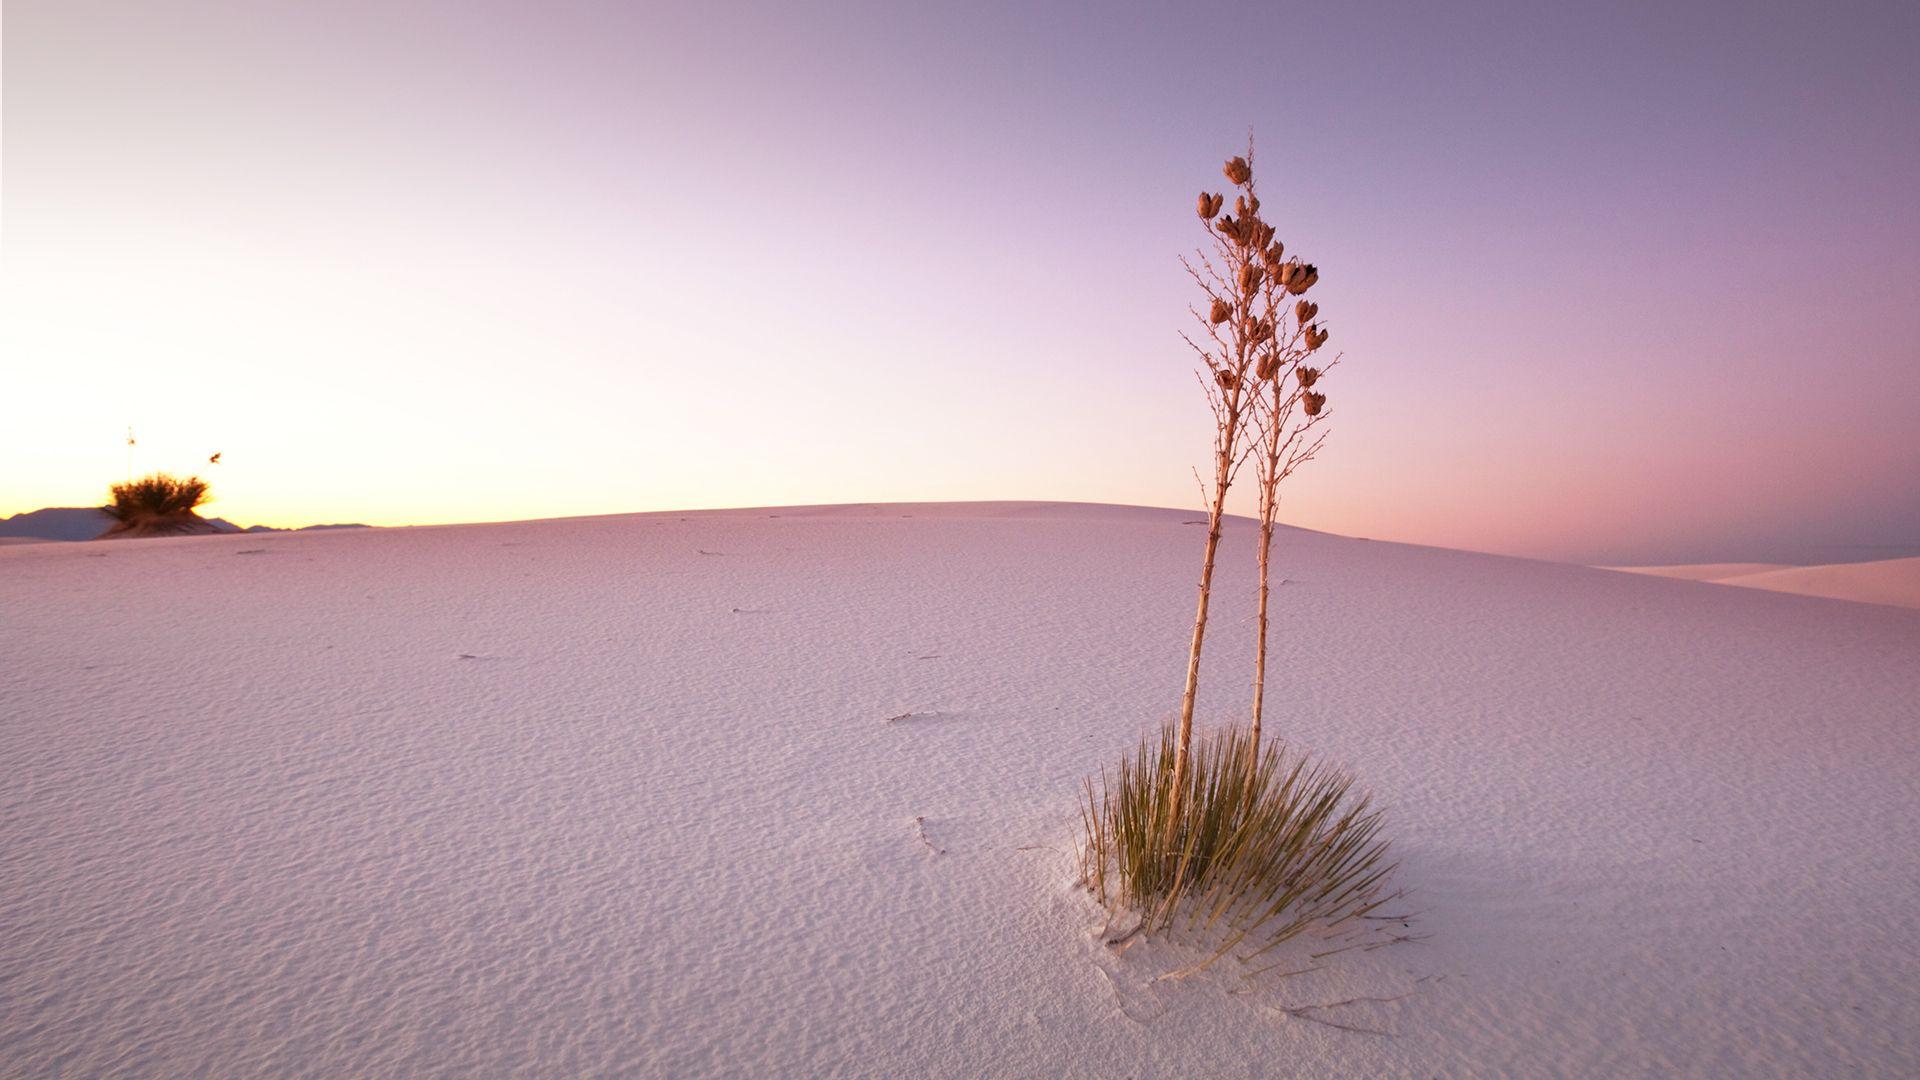 White Sands National Monument, New Mexico, USA. Windows 10